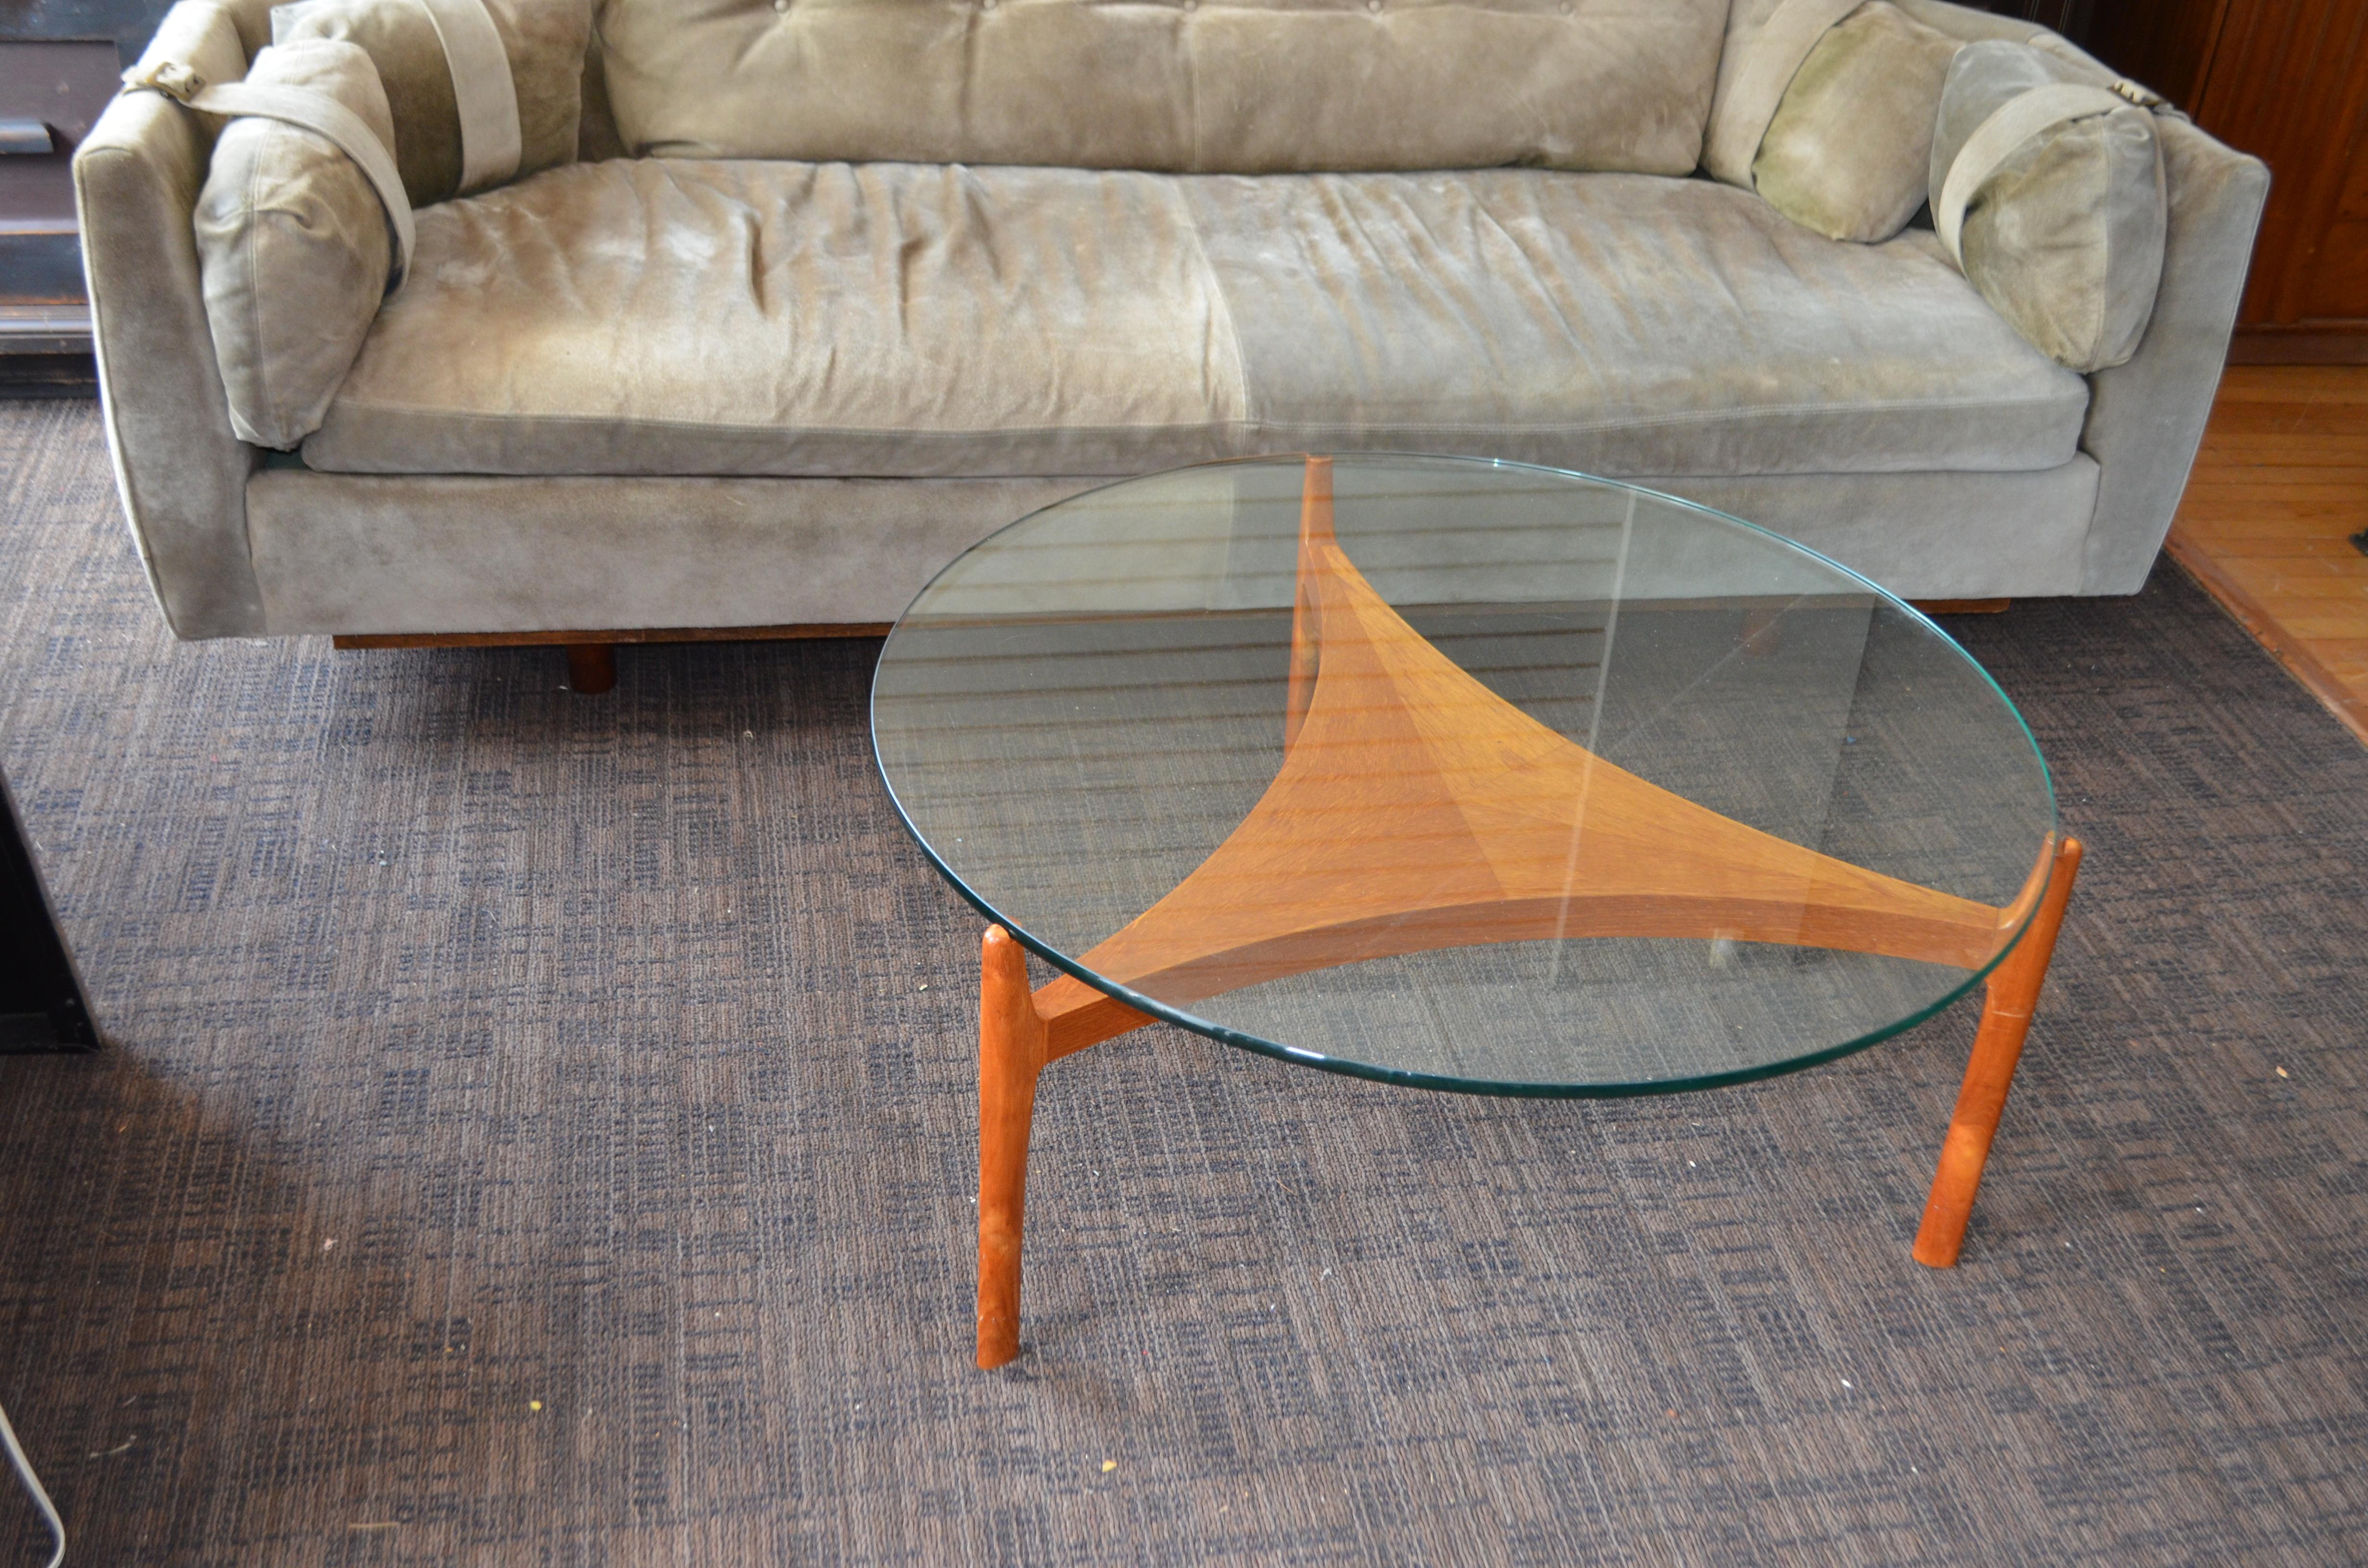 Midcentury Coffee Table with Teak Base and Glass Top Designed by Sven Ellekaer For Sale 1